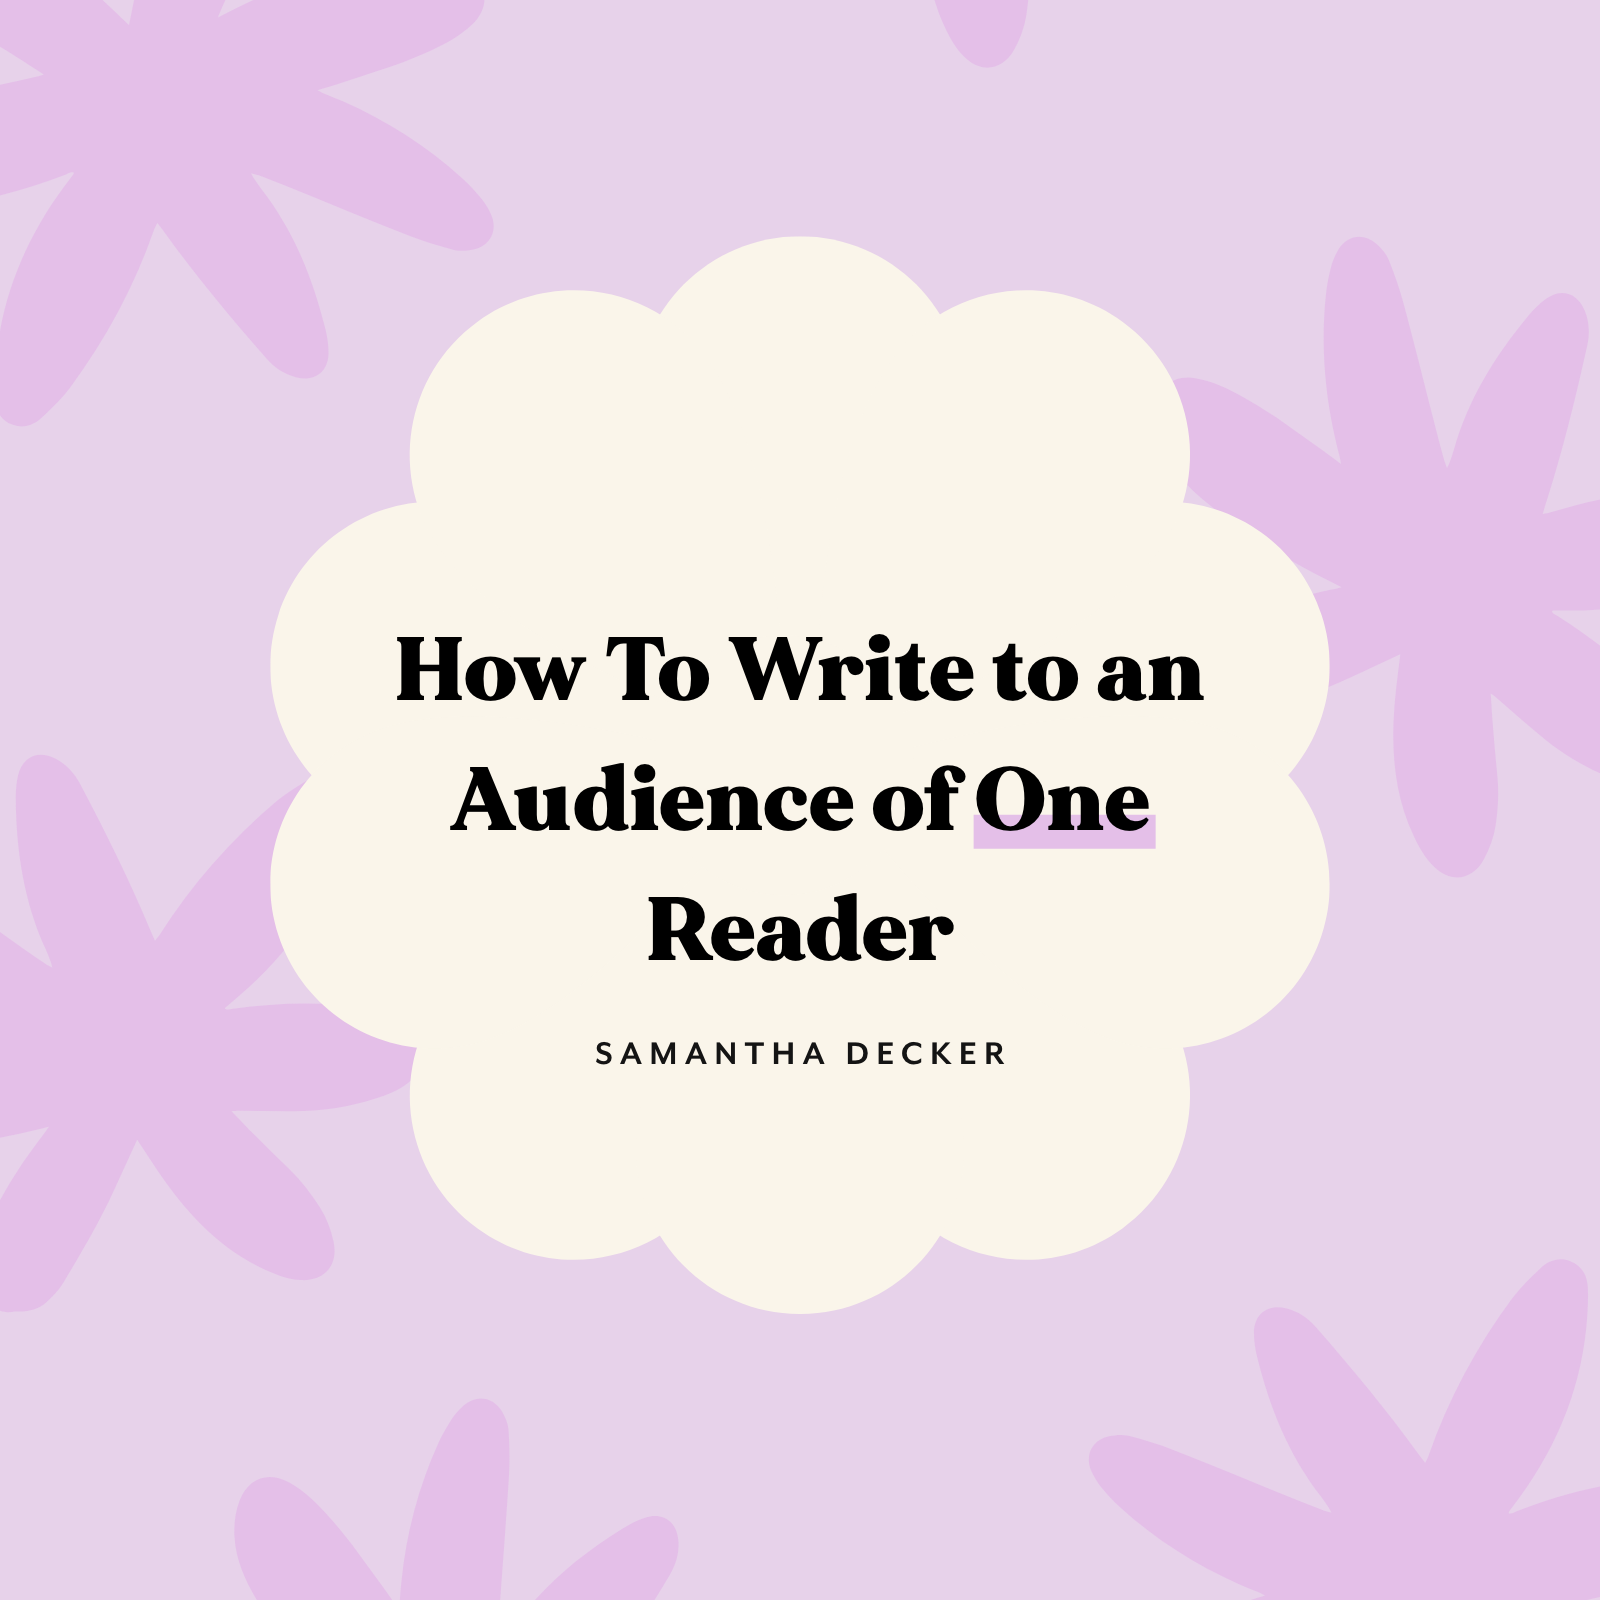 How To Write to an Audience of One Reader